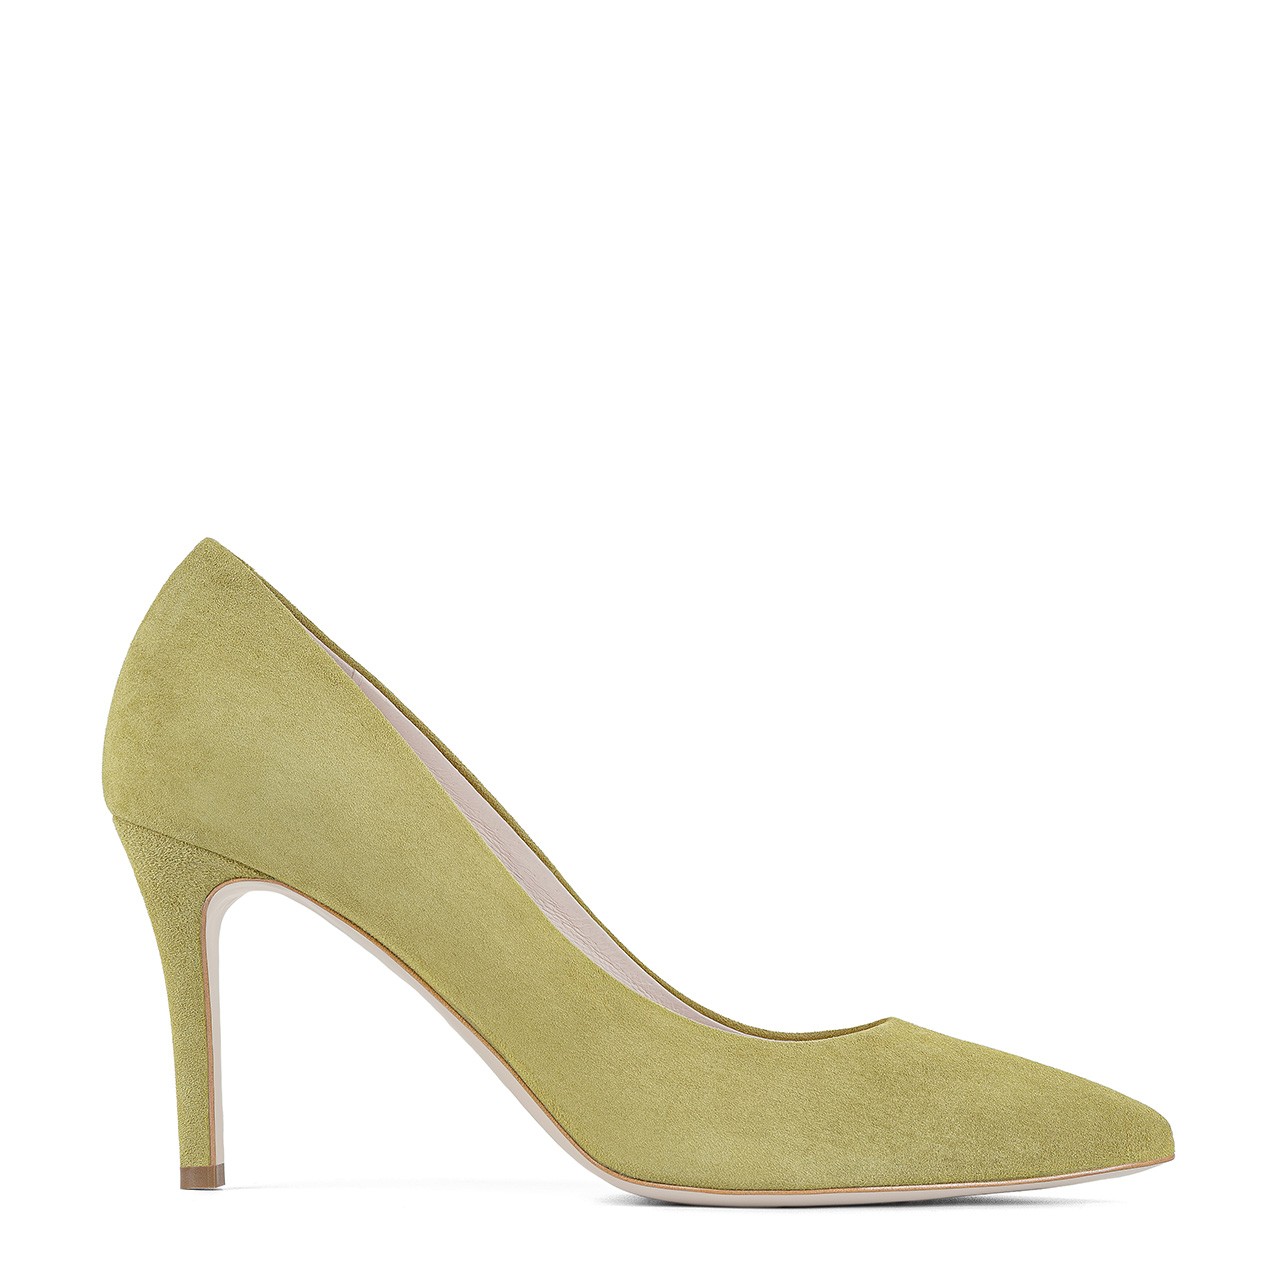 Classic suede high heels in green color with a stable heel - BRAVOMODA